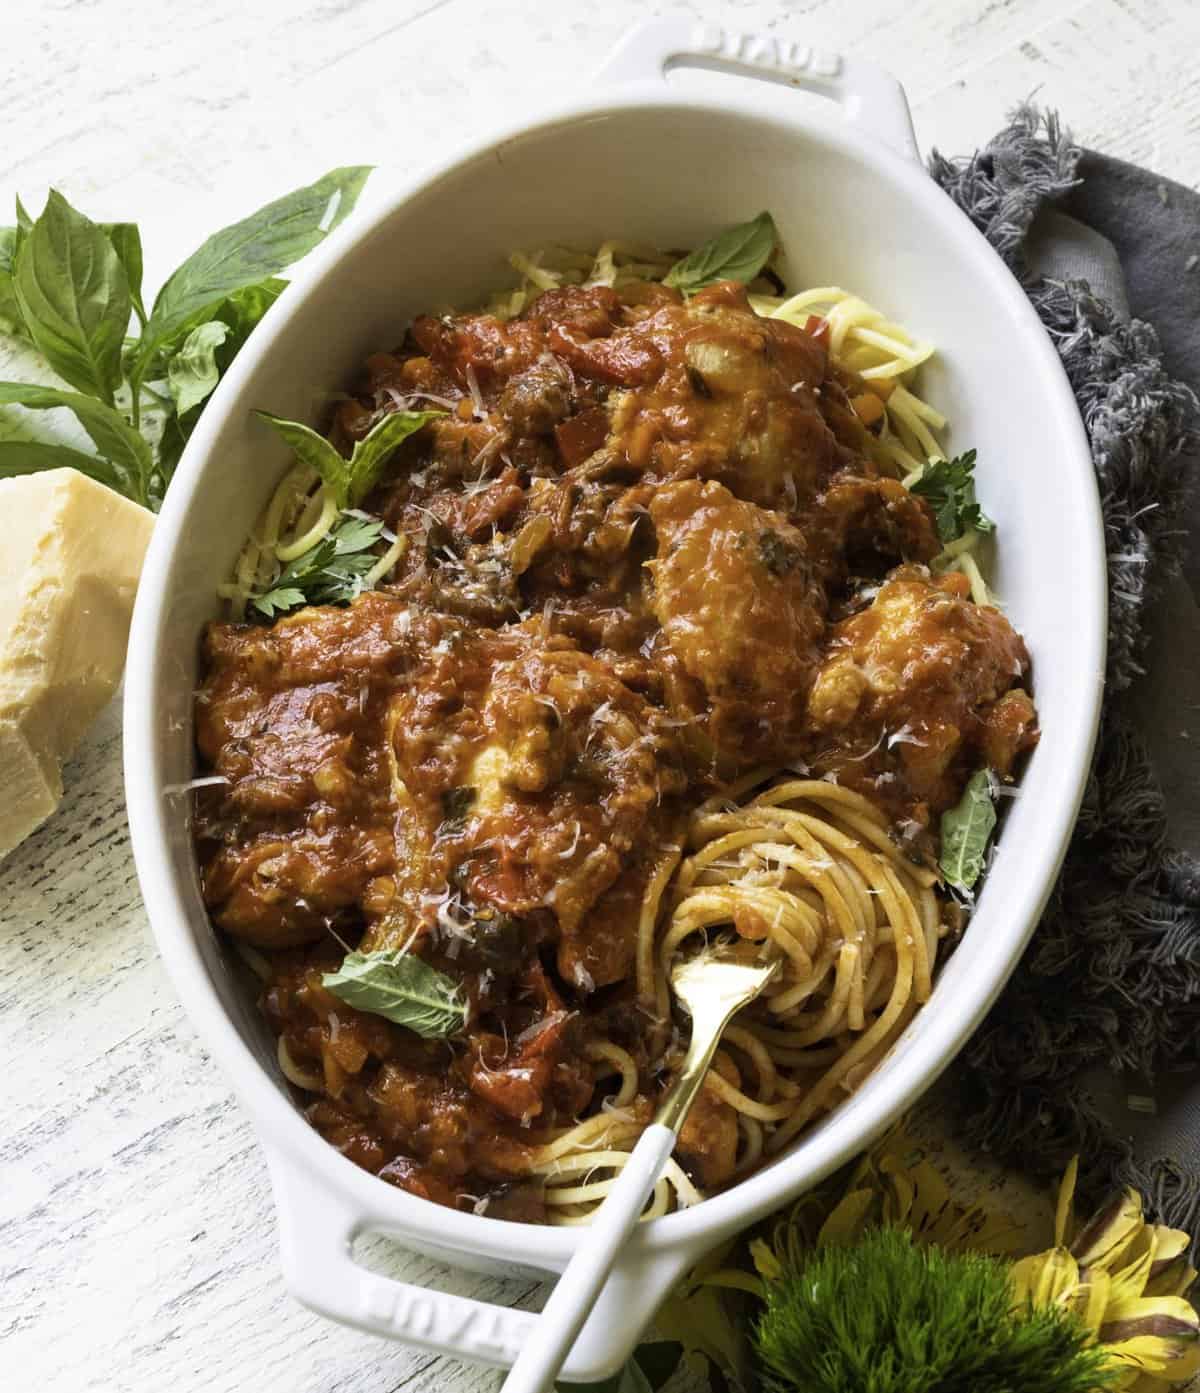 An Easy, Healthy Recipe for Chicken Cacciatore from Kroll’s Korner